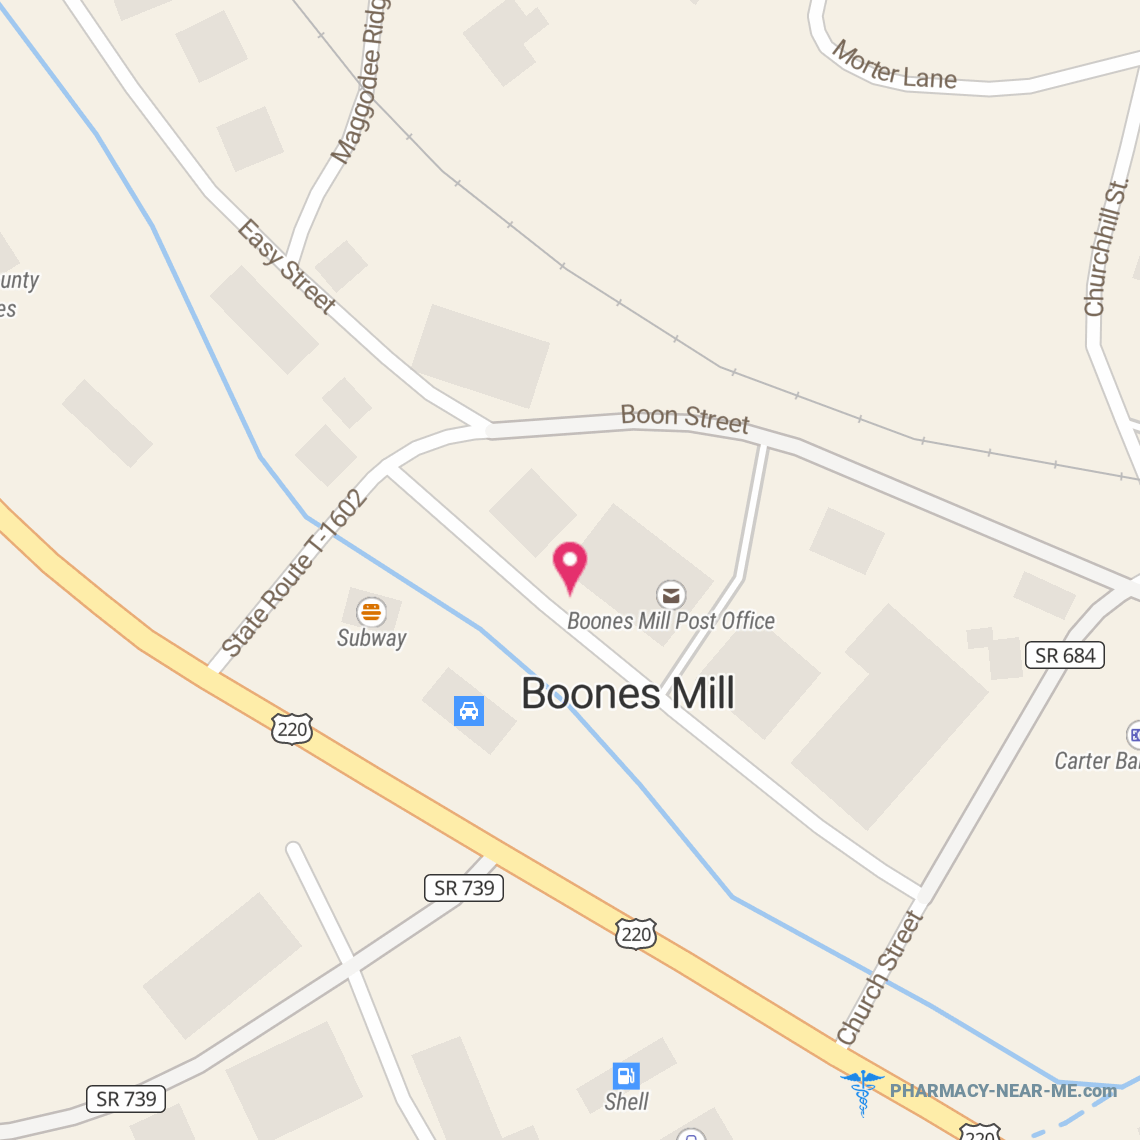 MEDICINE SHOPPE - Pharmacy Hours, Phone, Reviews & Information: 108 Main Street, Boones Mill, Virginia 24065, United States